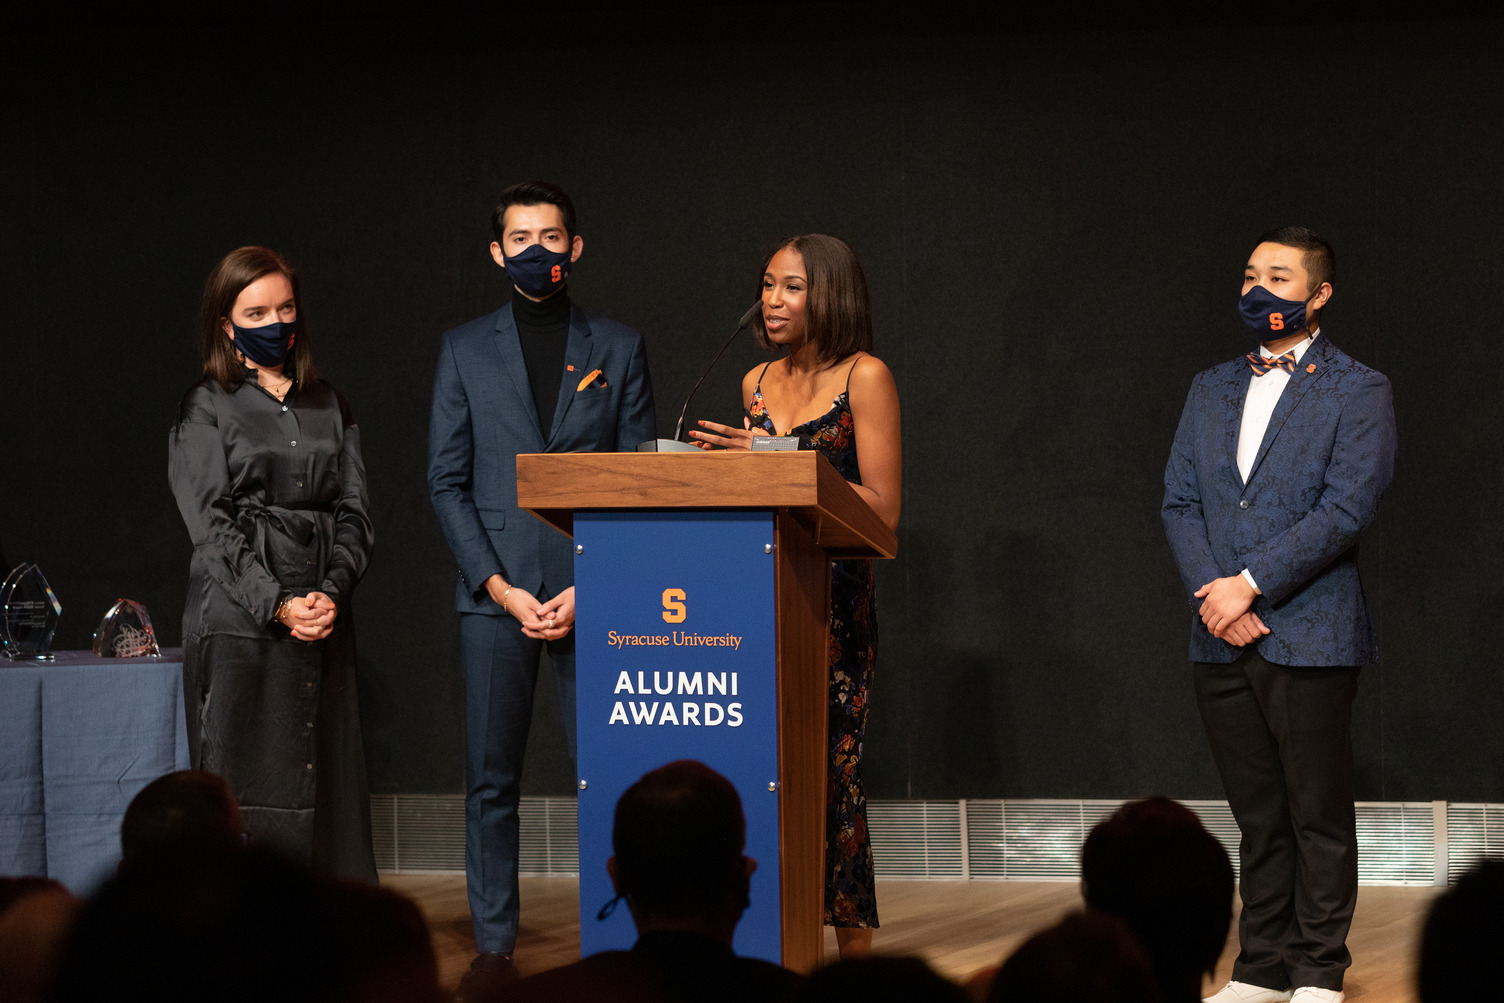 Katie Hoole, Ivan Robles, Nicole Osborne and Leo Wong on stage at the Alumni Awards during Orange Central 2021